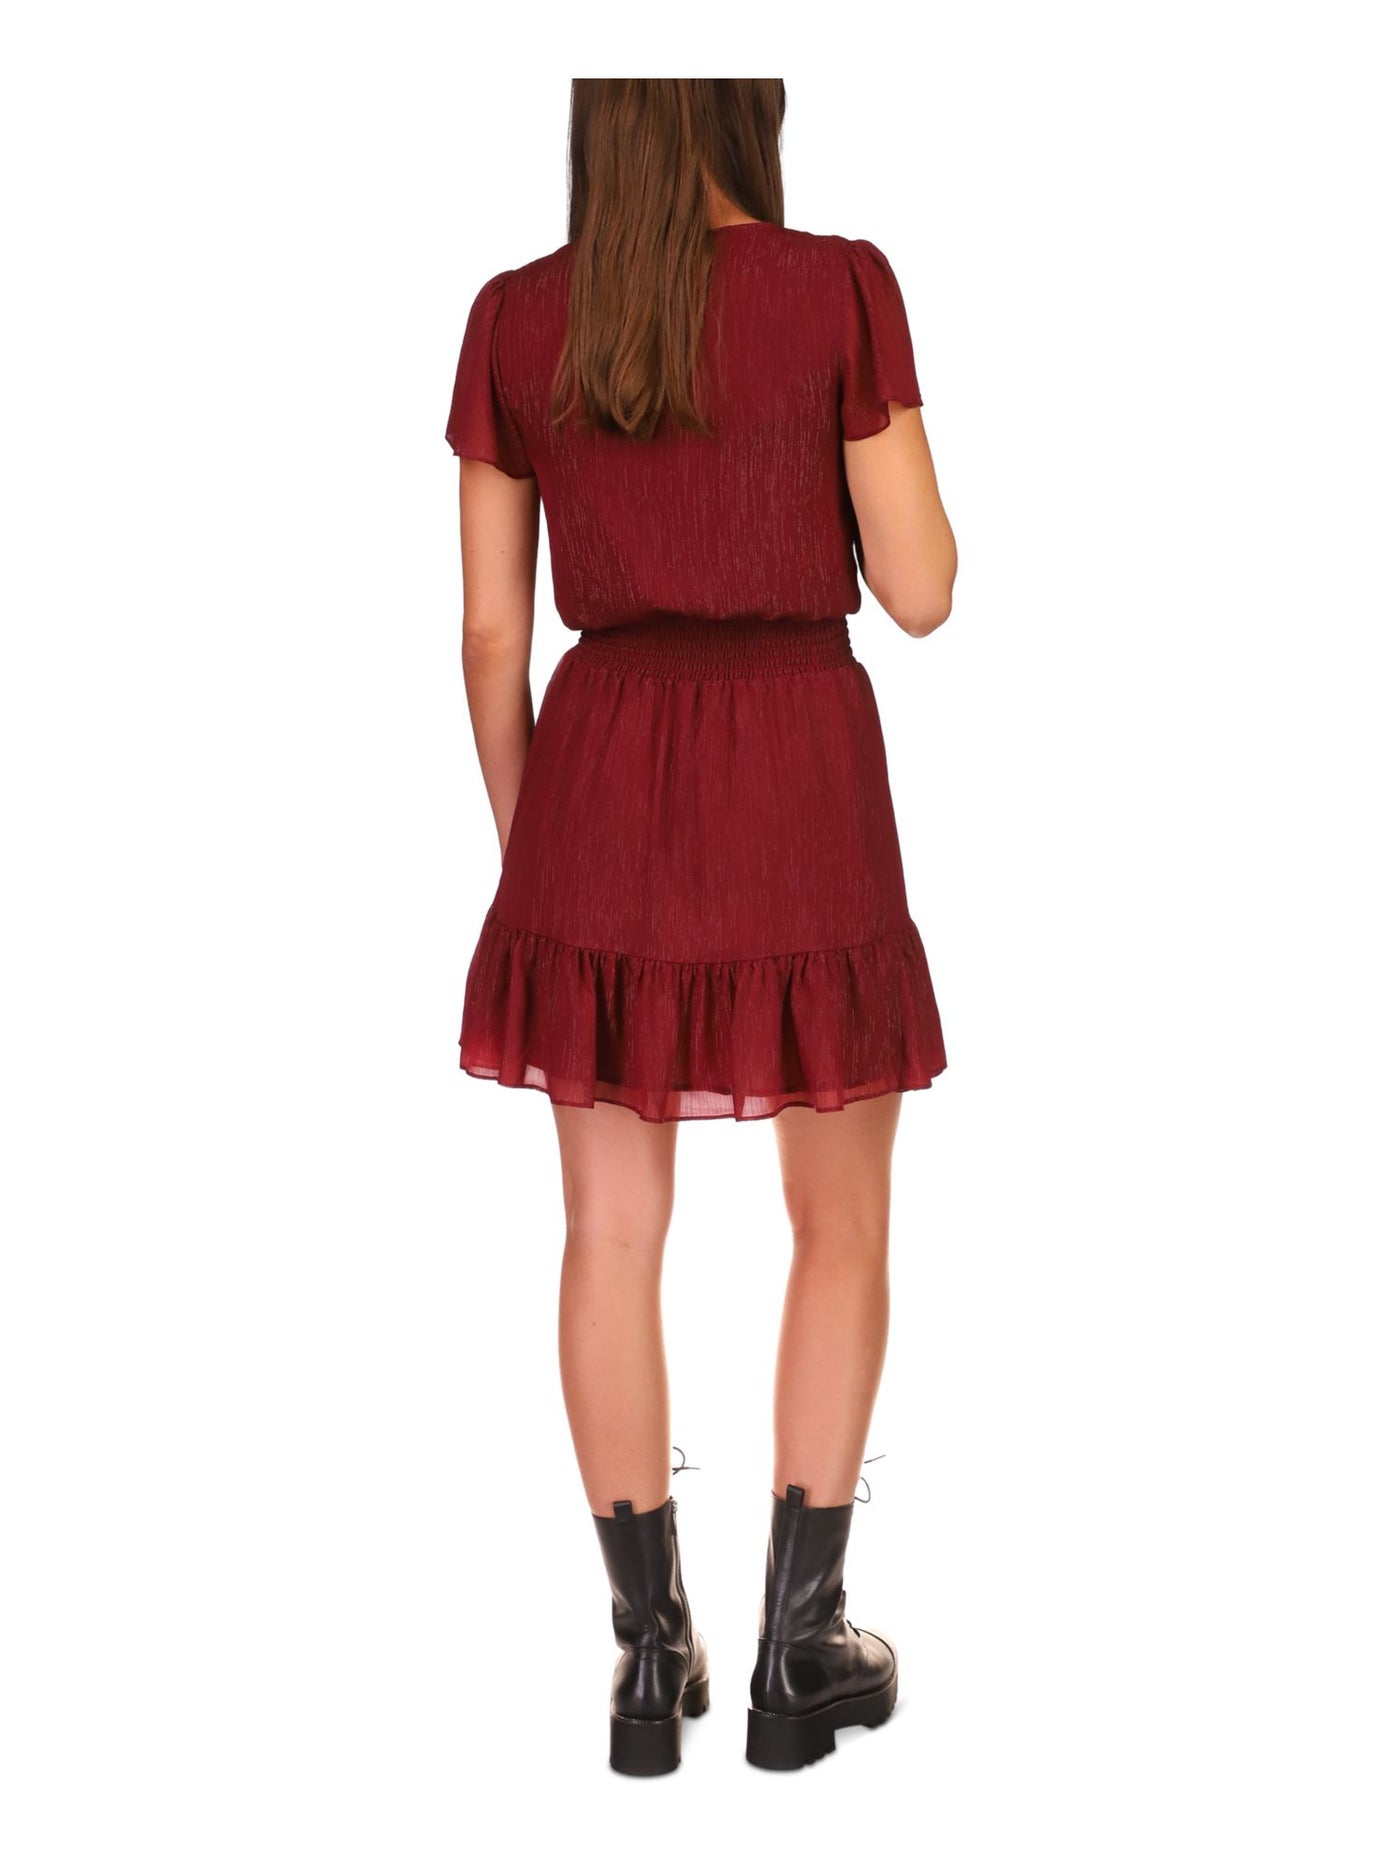 MICHAEL MICHAEL KORS Womens Burgundy Smocked Sheer Lined Ruffled Hook And Eye Front Short Sleeve Surplice Neckline Above The Knee A-Line Dress S